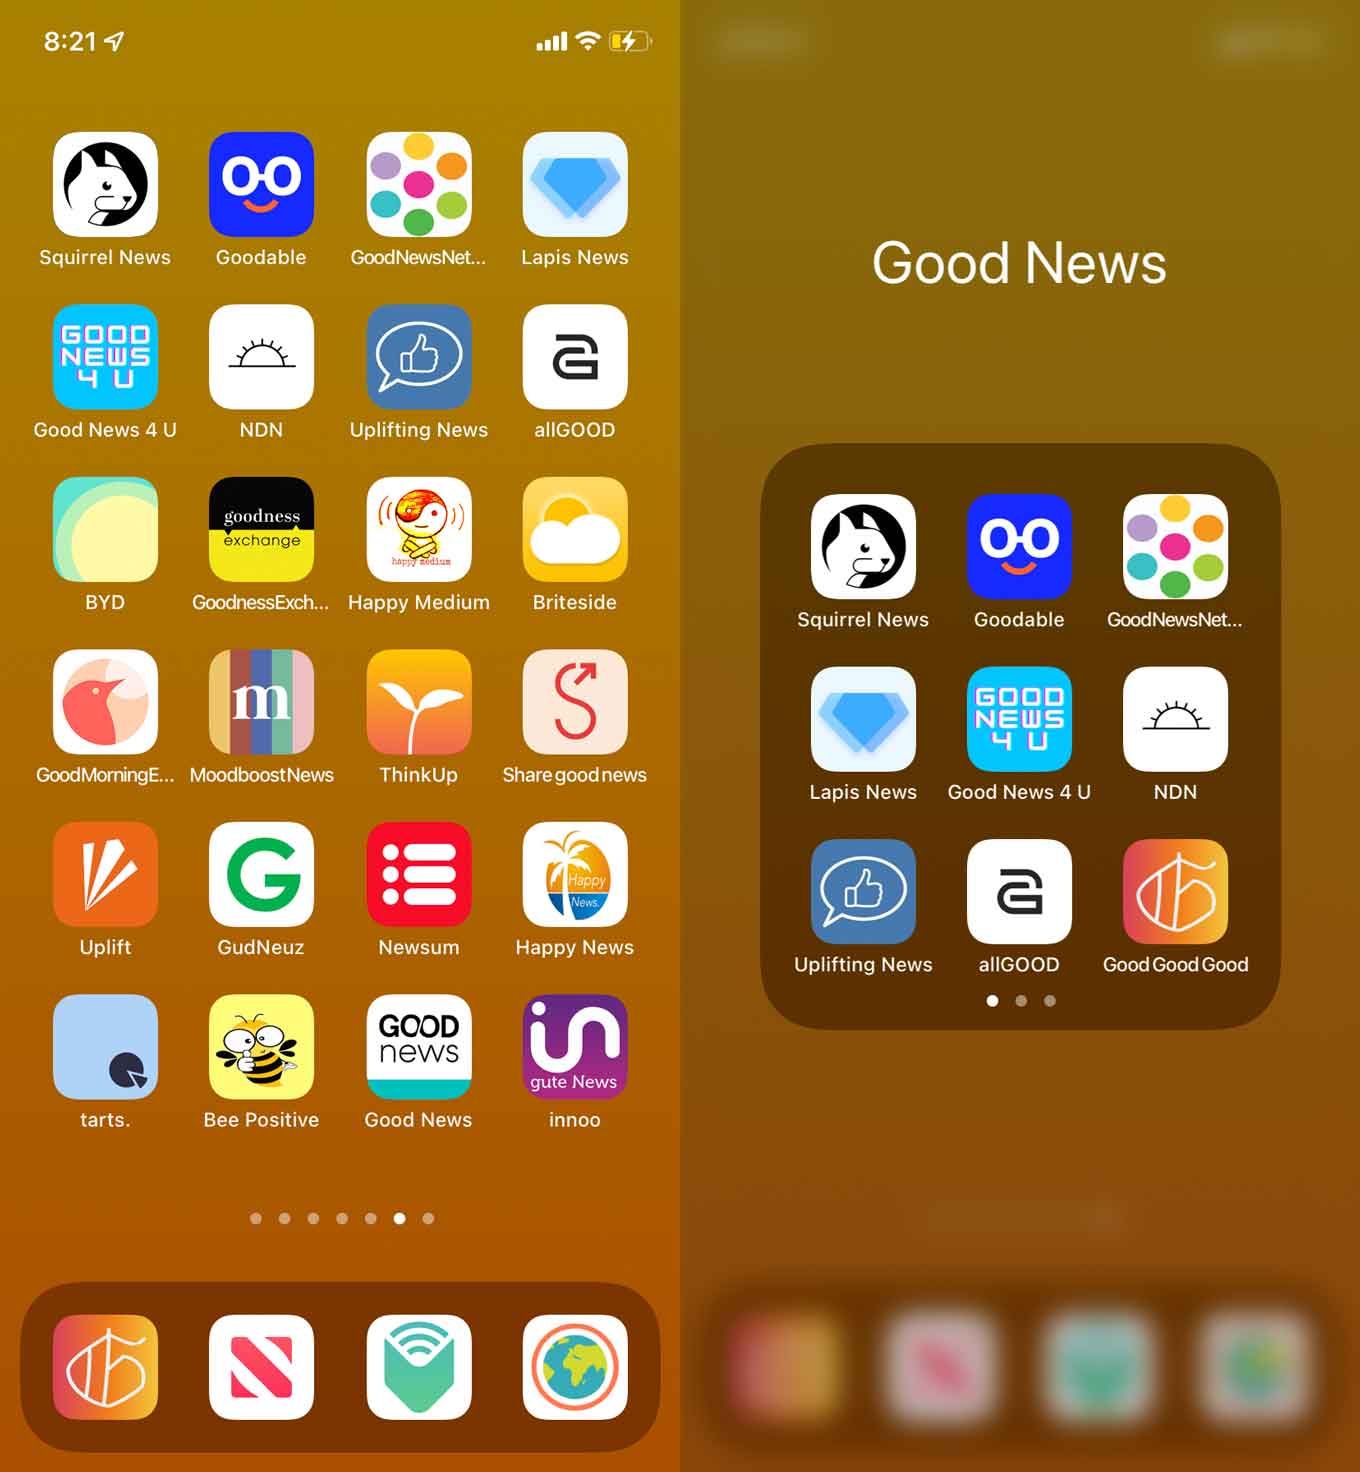 All good news apps collected on an iPhone home screen and in a folder, including allGood, NDN, BYD, Happy Medium, Briteside, Share Good Newsand more...